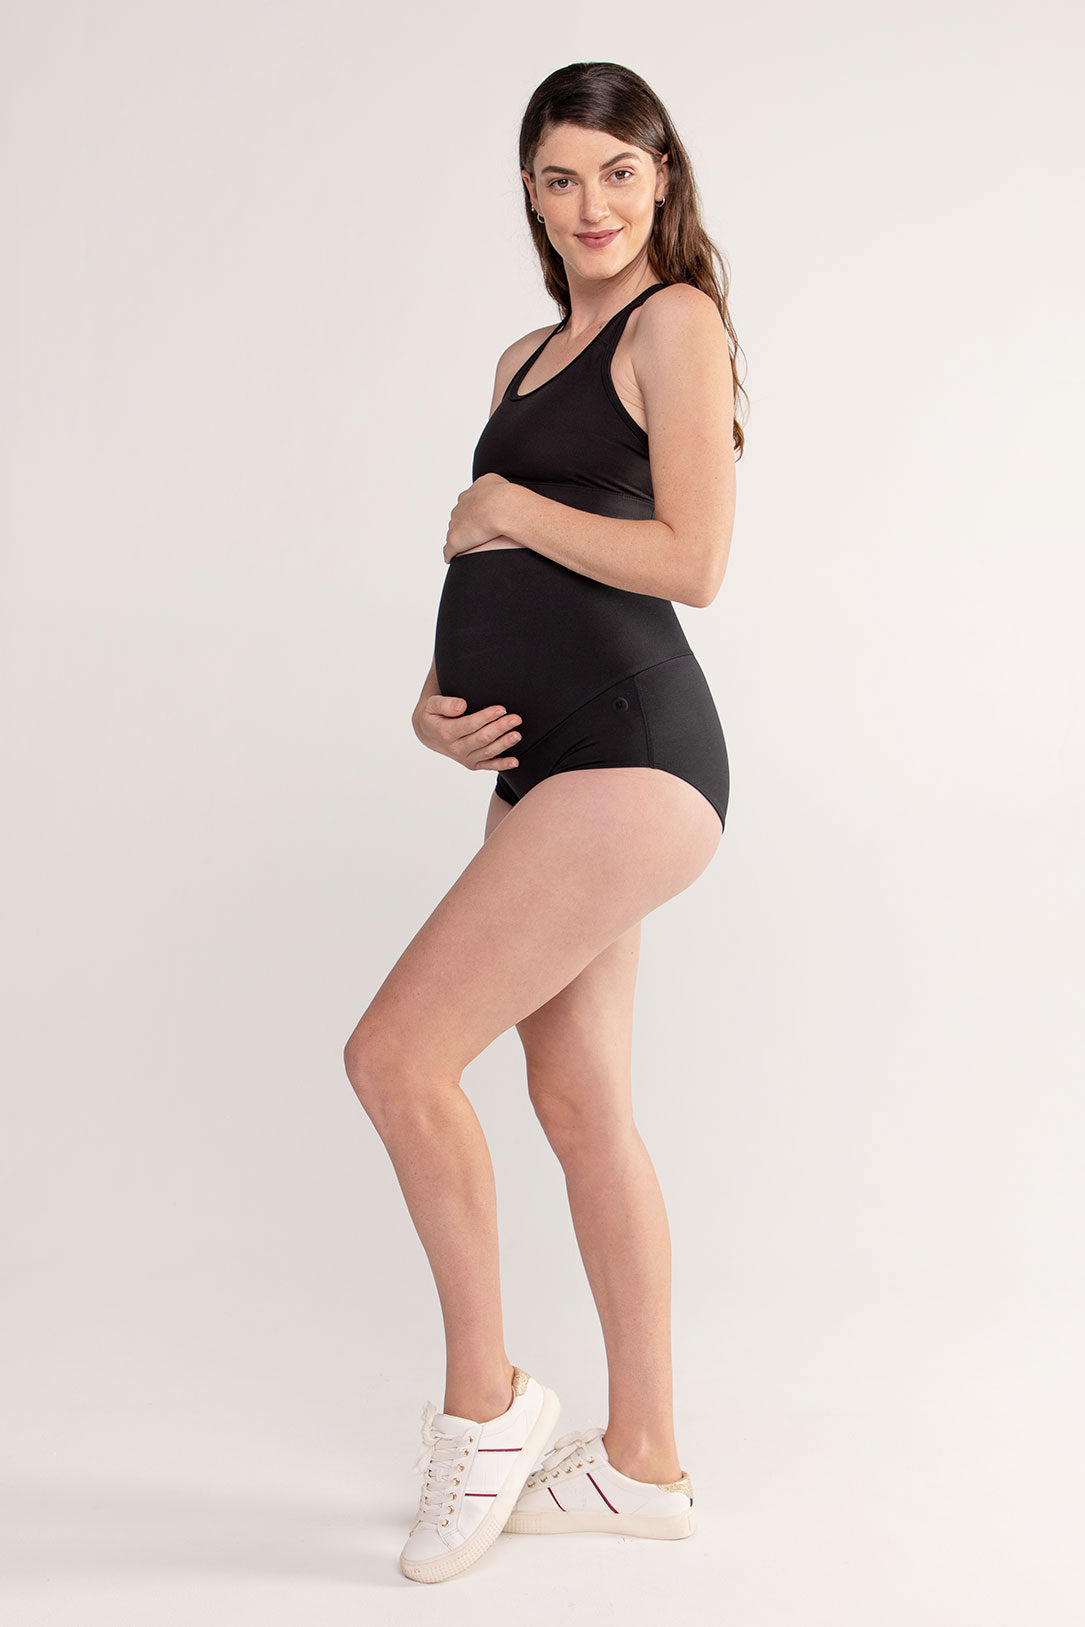 Pregnancy Support Brief in Black, Maternity, Active Truth